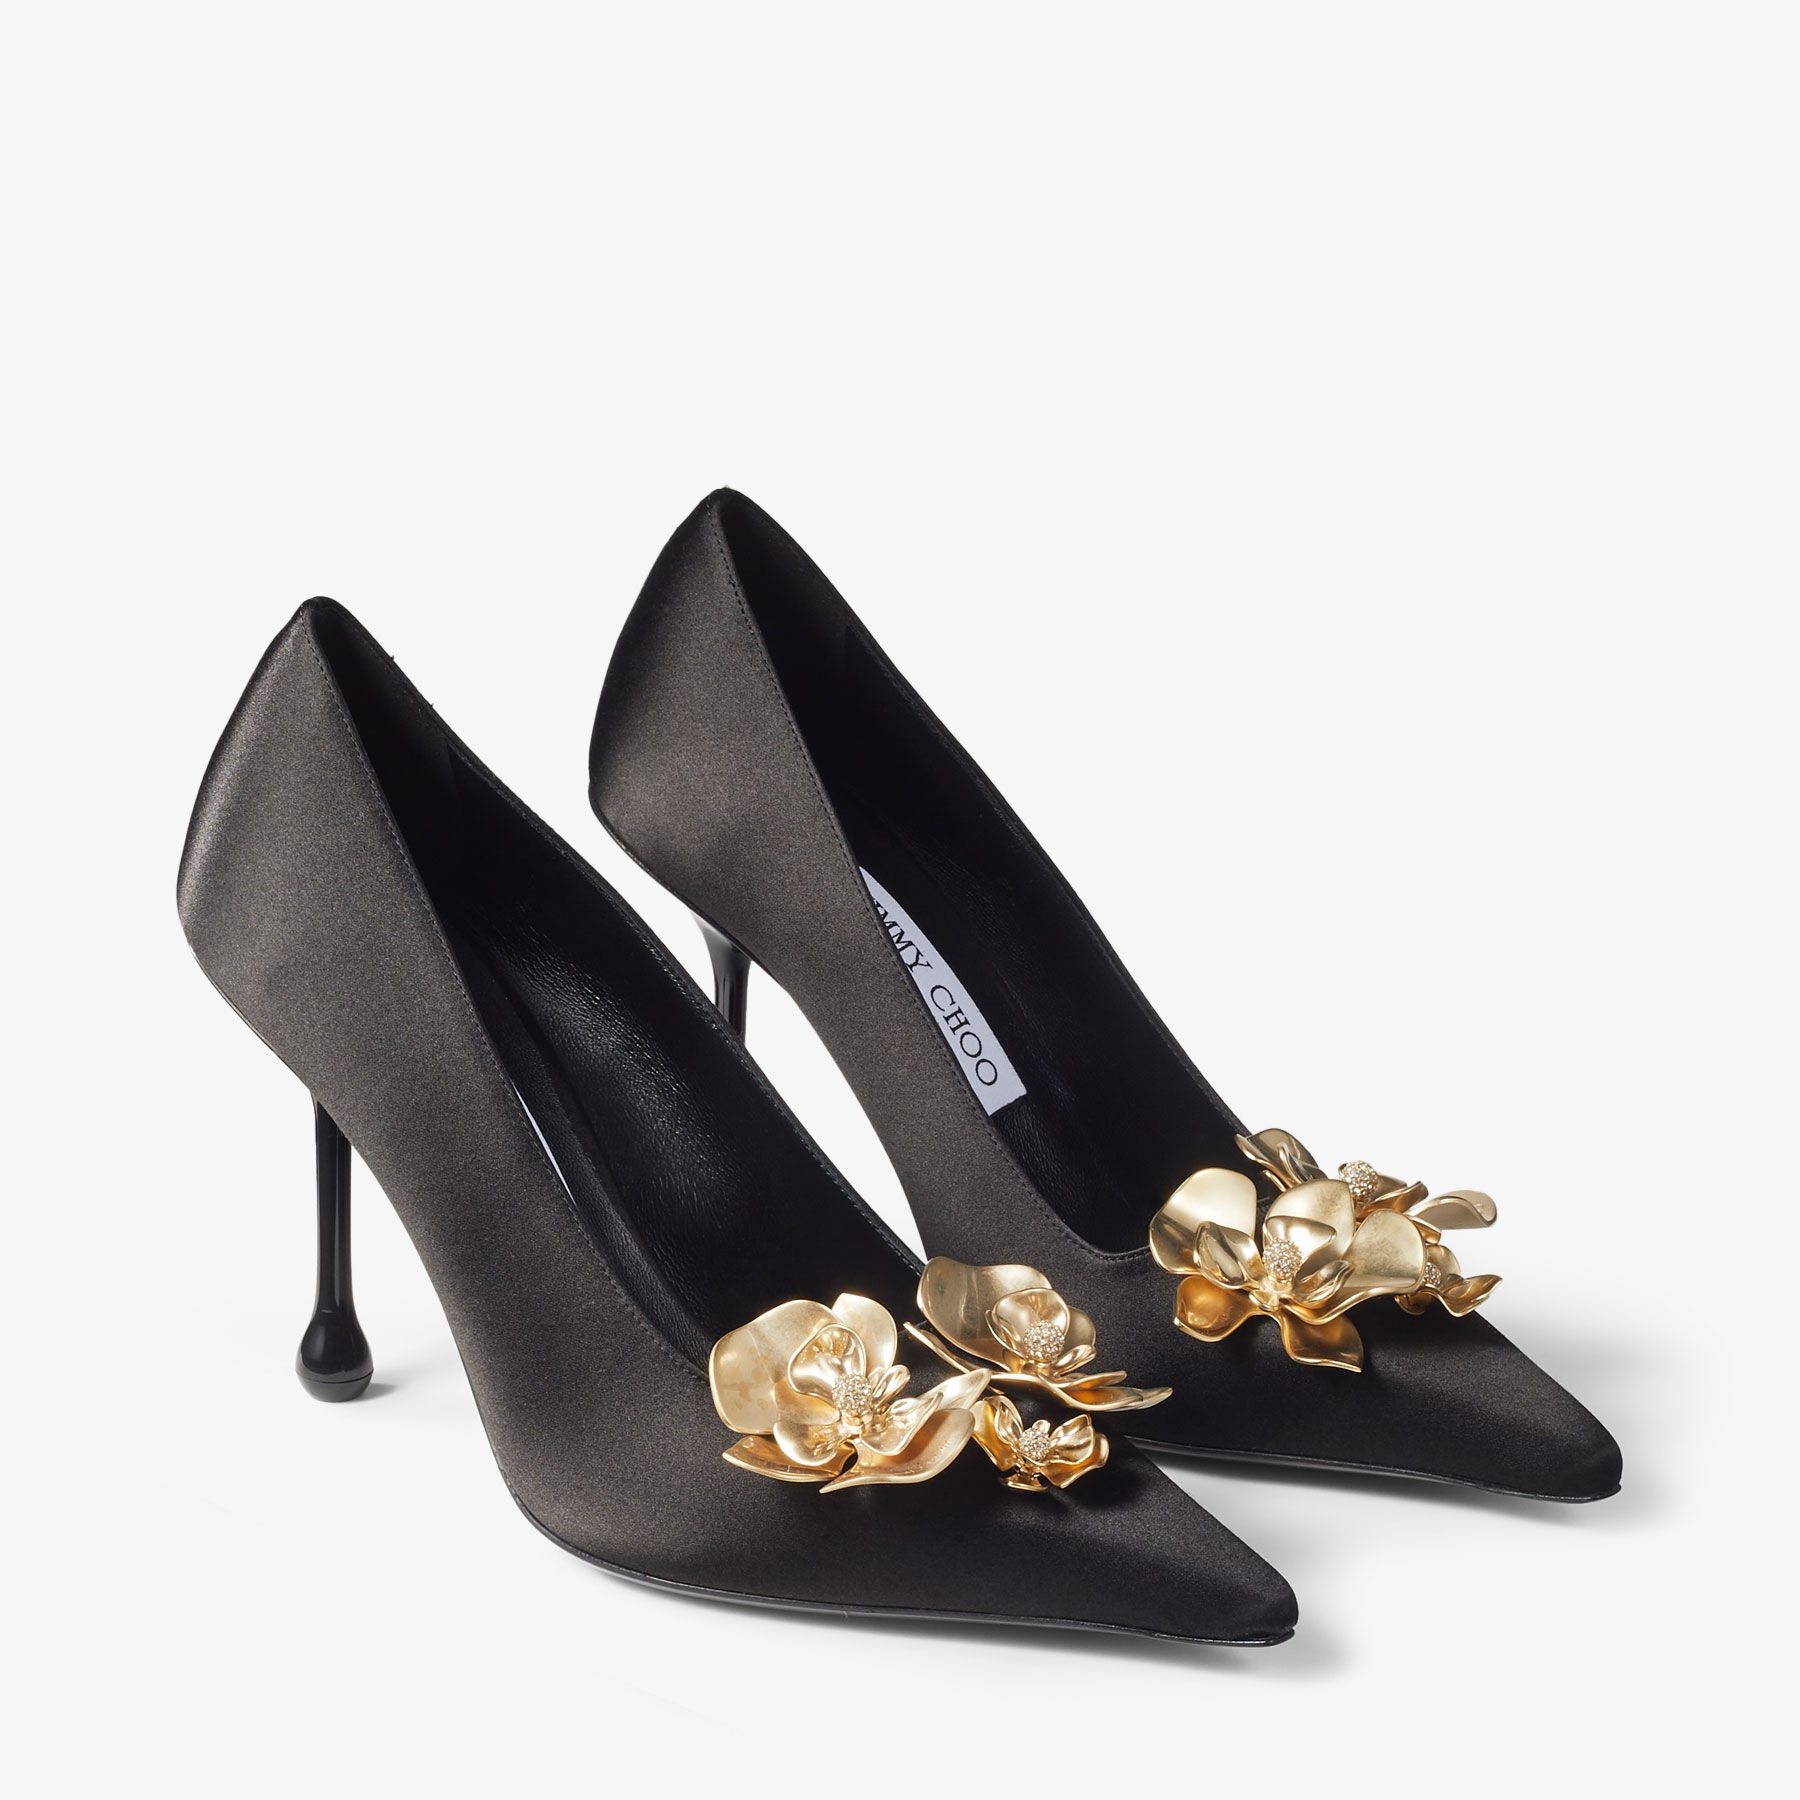 Ixia 95
Black Satin Pumps with Flowers - 3